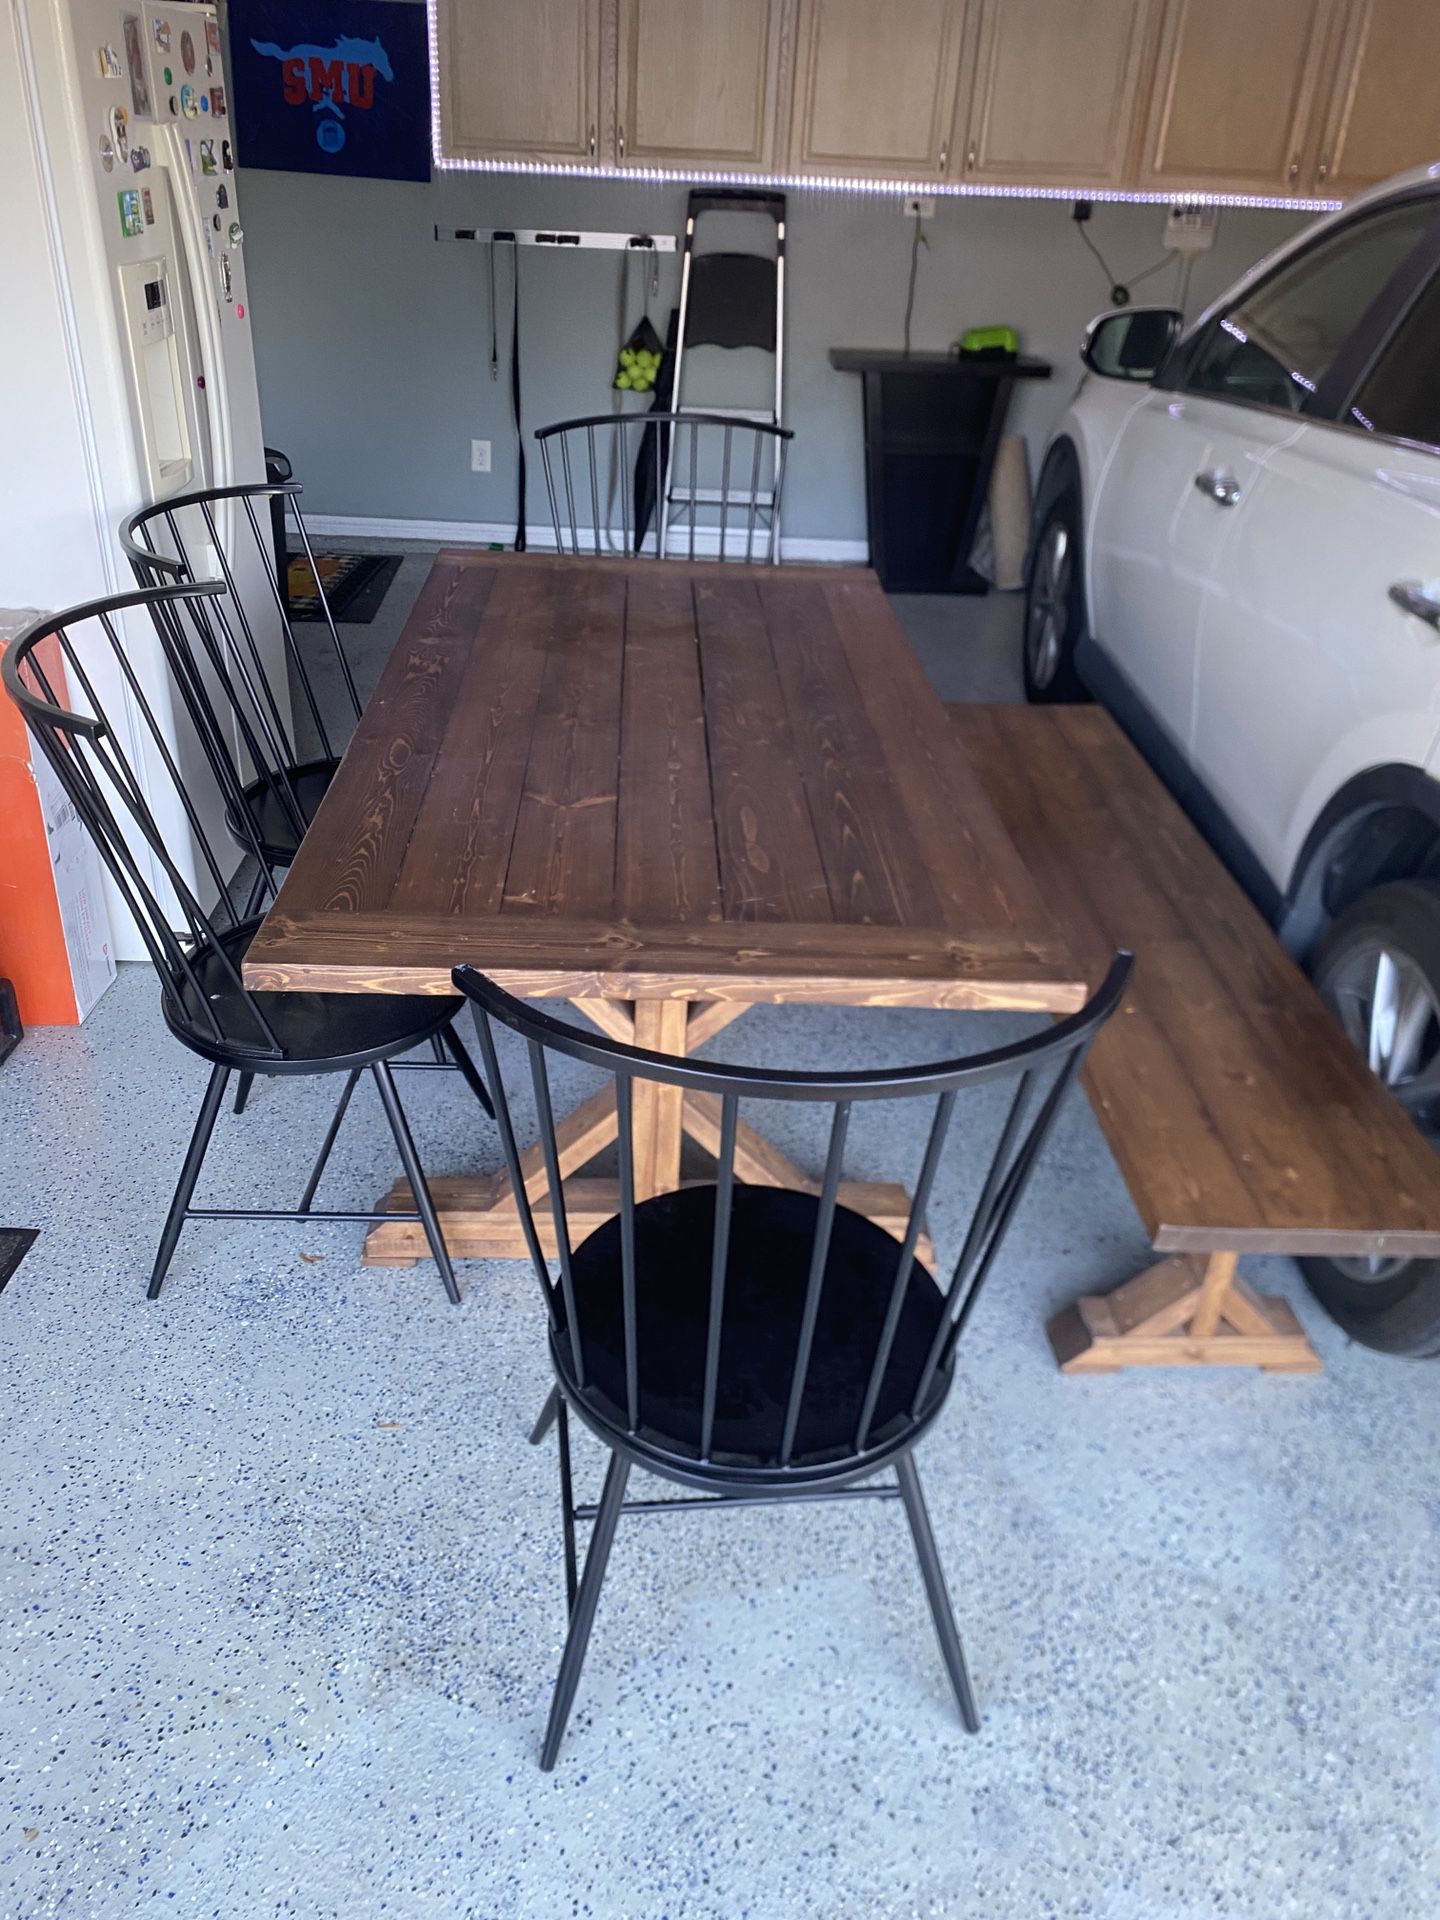 Kitchen Table With Bench And Chairs